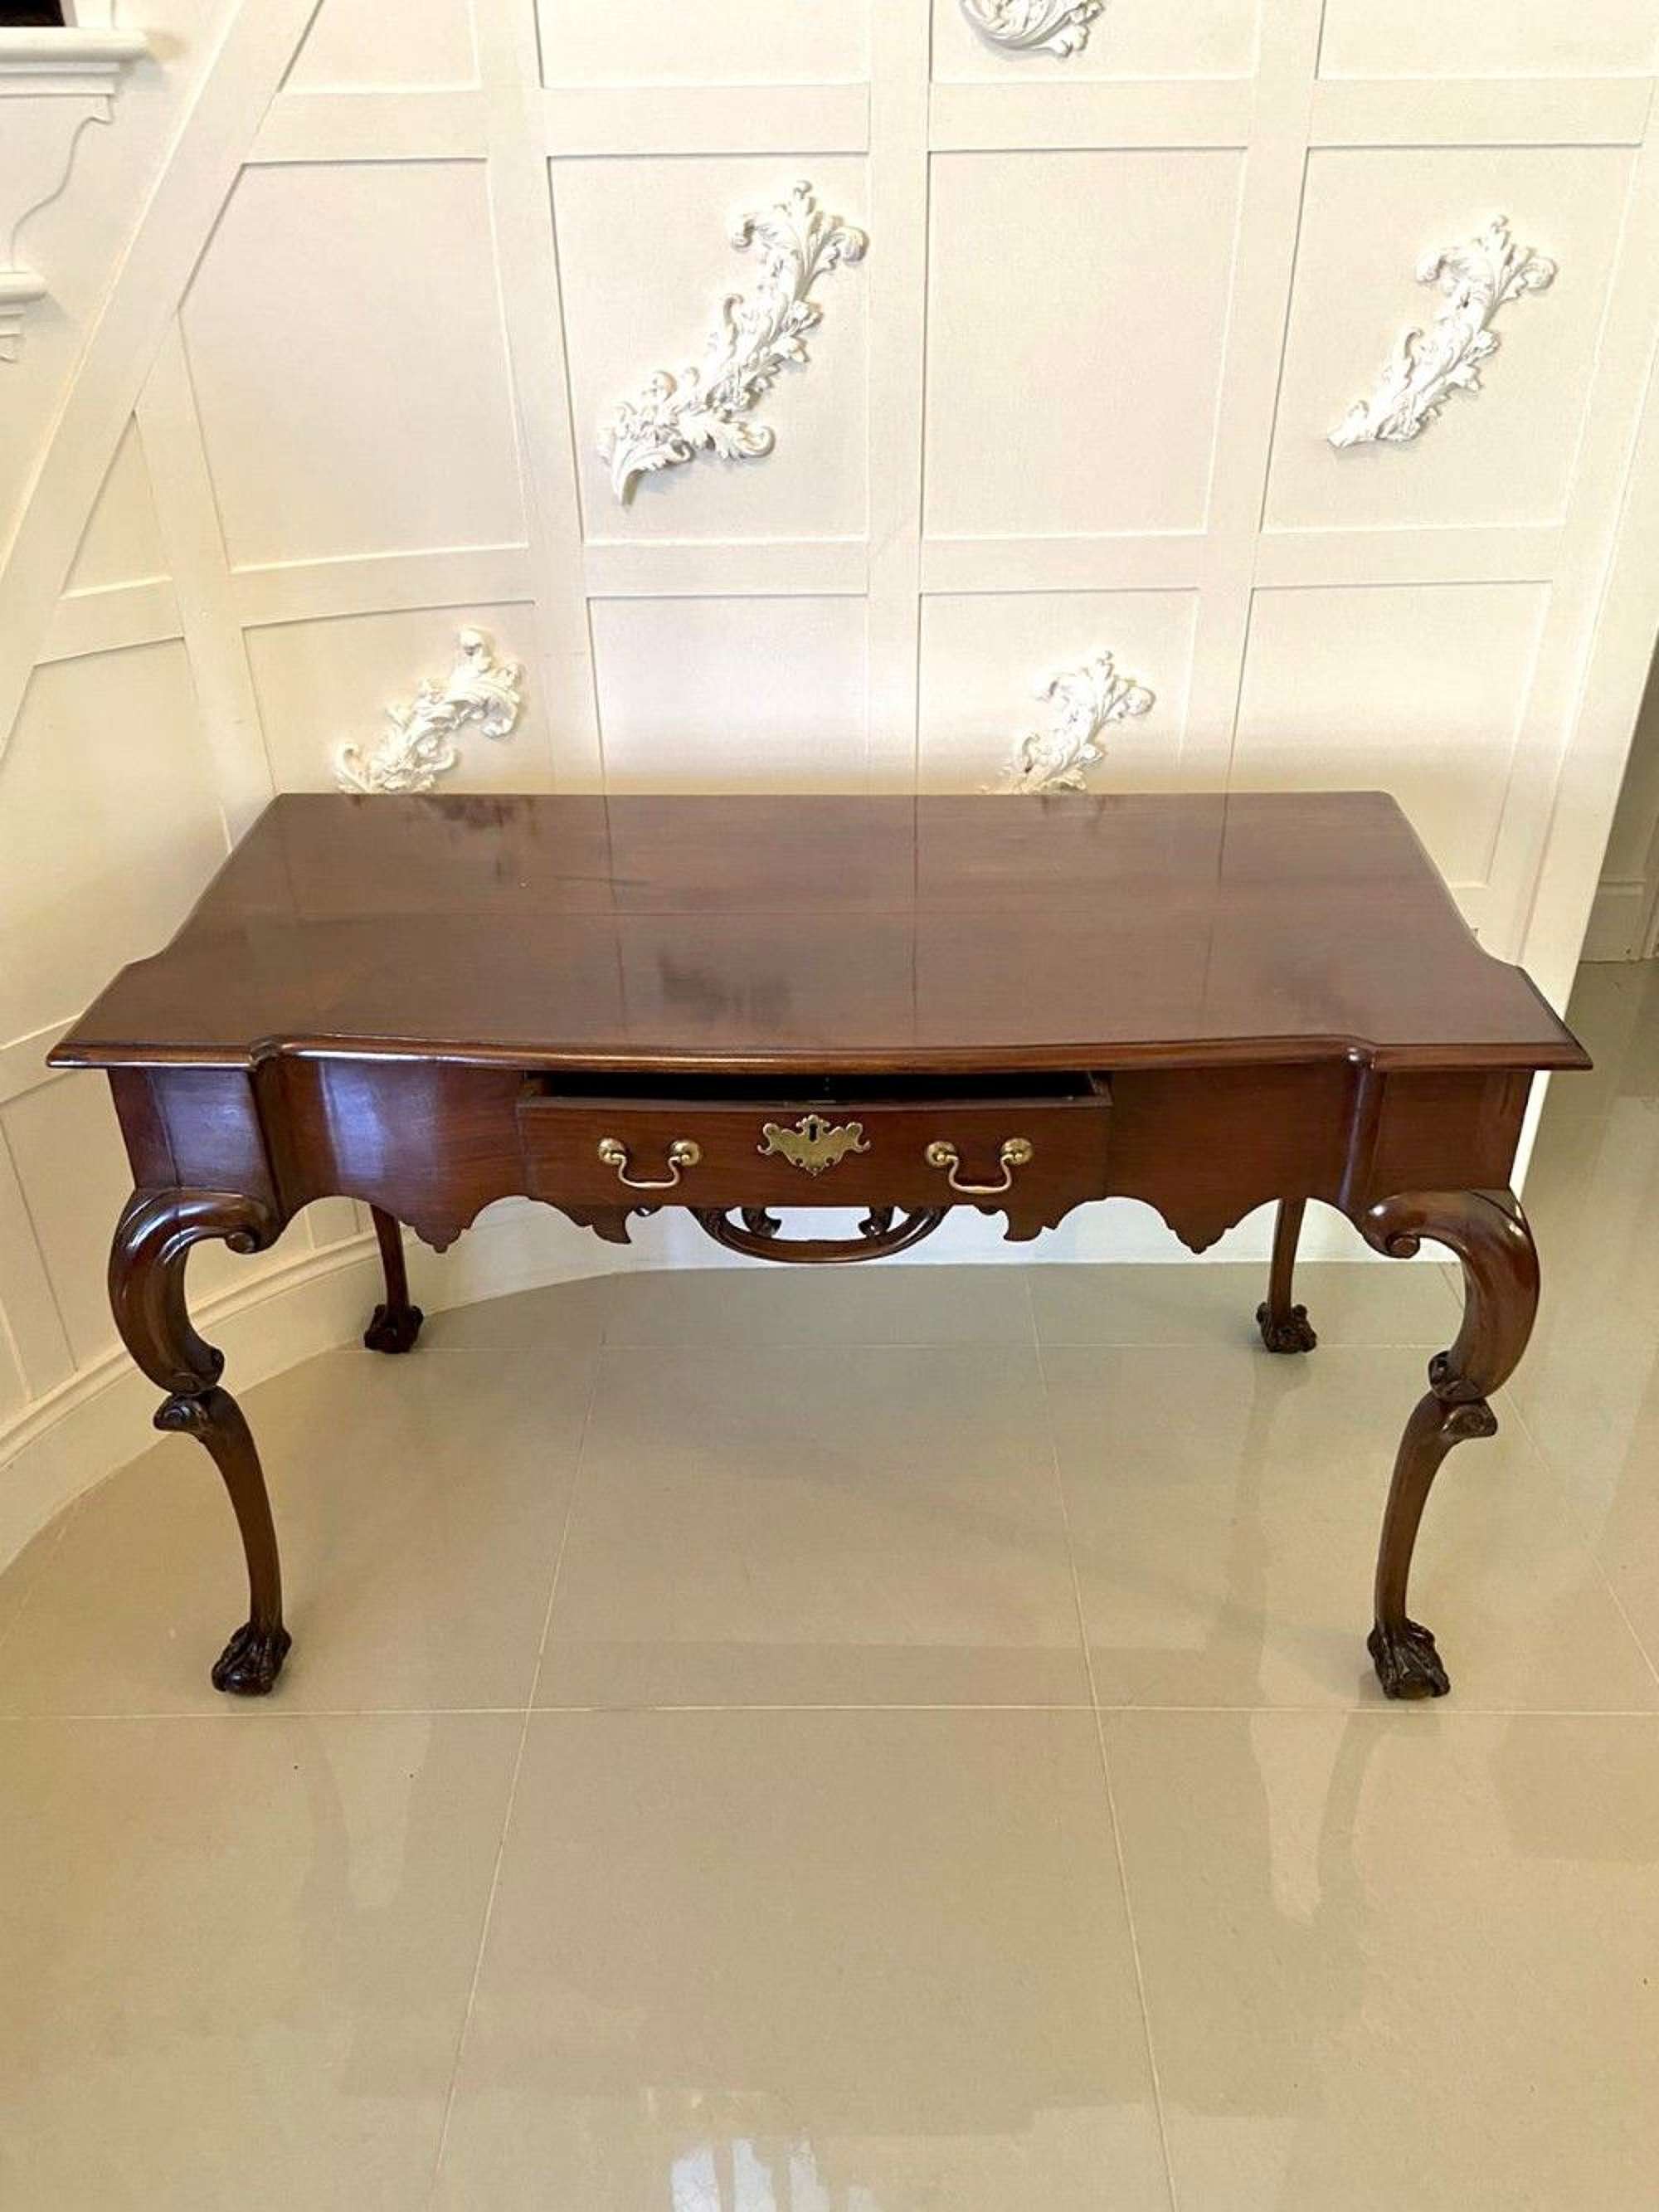 Rare 18th Century American Antique Chippendale Serving Table